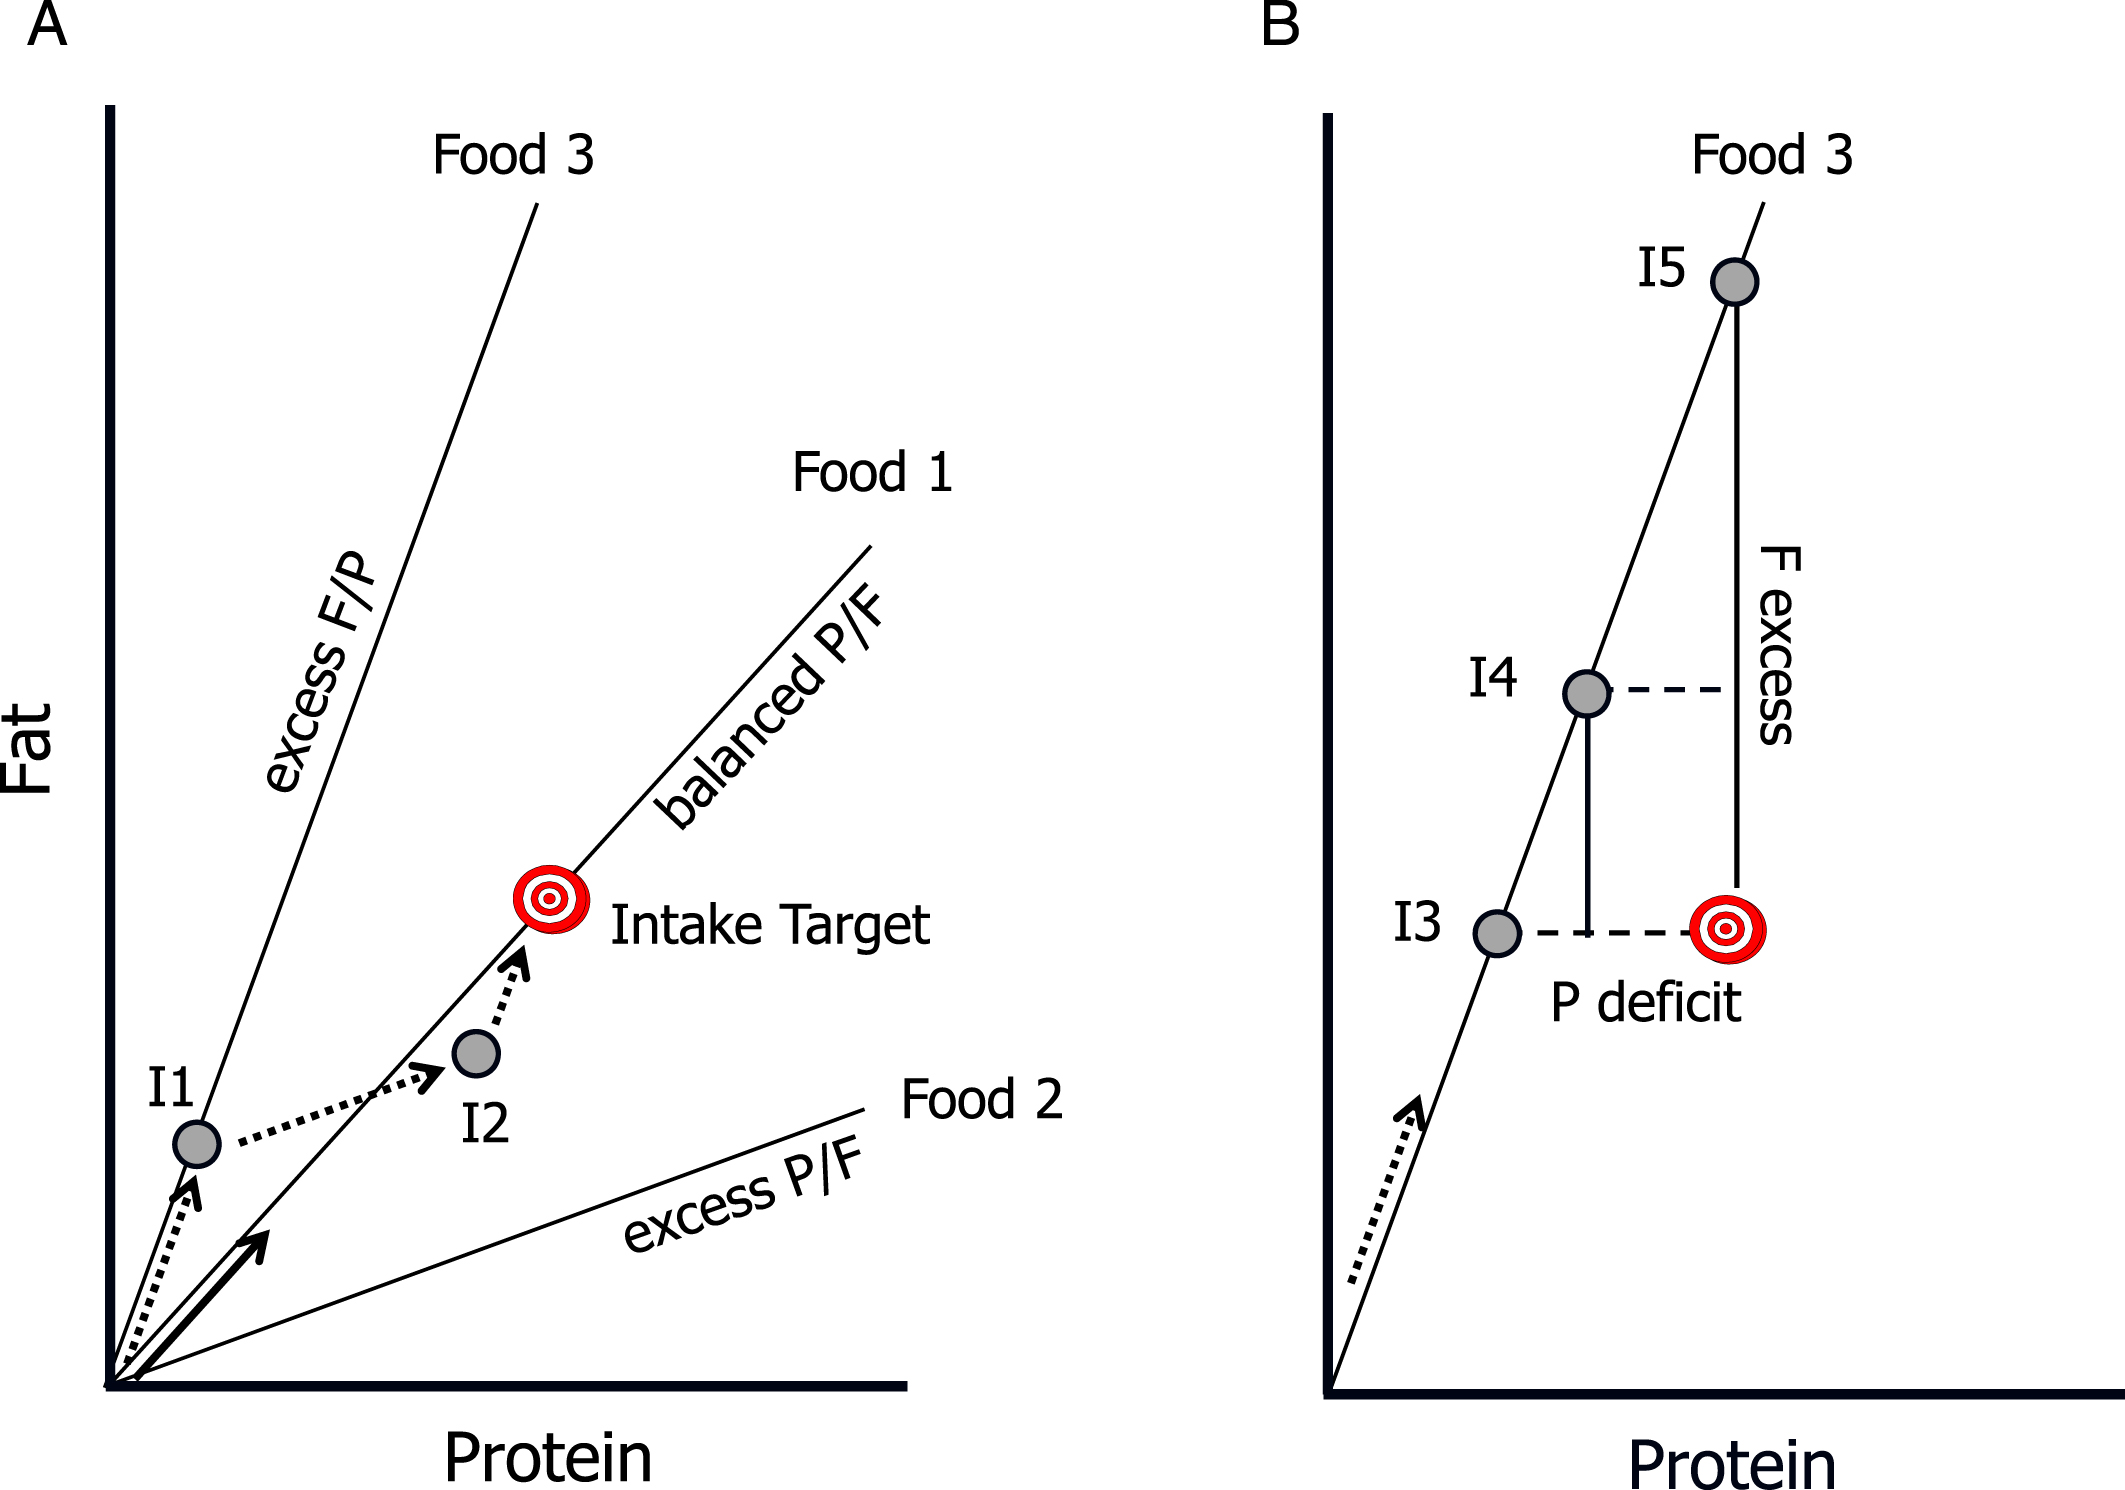 Core concepts of the Geometric Framework for Nutrition. The intake target represents the optimal amount and balance of the nutrients required by the animal. Radial lines are “rails” showing the ratio of the nutrients in foods, and grey circles represent hypothetical nutrient intakes (I1 –I5). As the animal eats it “moves” along a trajectory at an angle equal to the angle of the rail for the food it is eating (arrows), with sequential arrows representing intake trajectories. A) Food 1 is balanced with respect to the protein:fat ratio (P:F): it passes through the Intake Target, and thus enables the animal to directly reach the target (solid arrow). In contrast, Foods 2 and 3 are imbalanced (excess P and F respectively) and do not enable the animal to reach the target. It can, however, reach the target by mixing its intake from these “nutritionally complementary” foods (dotted arrows): for example, by first feeding on Food 3 to point I1, then switching to Food 2 at I2 switching back to Food3. B) If restricted to a single imbalanced food, the animal faces a trade-off between over-eating one nutrient and under-eating another. At I3 it meets its requirements for fat but suffers a protein deficit, at I5 it has optimal protein intake but excess fat, and at I4 it has both a moderate excess of fat and deficit of protein.